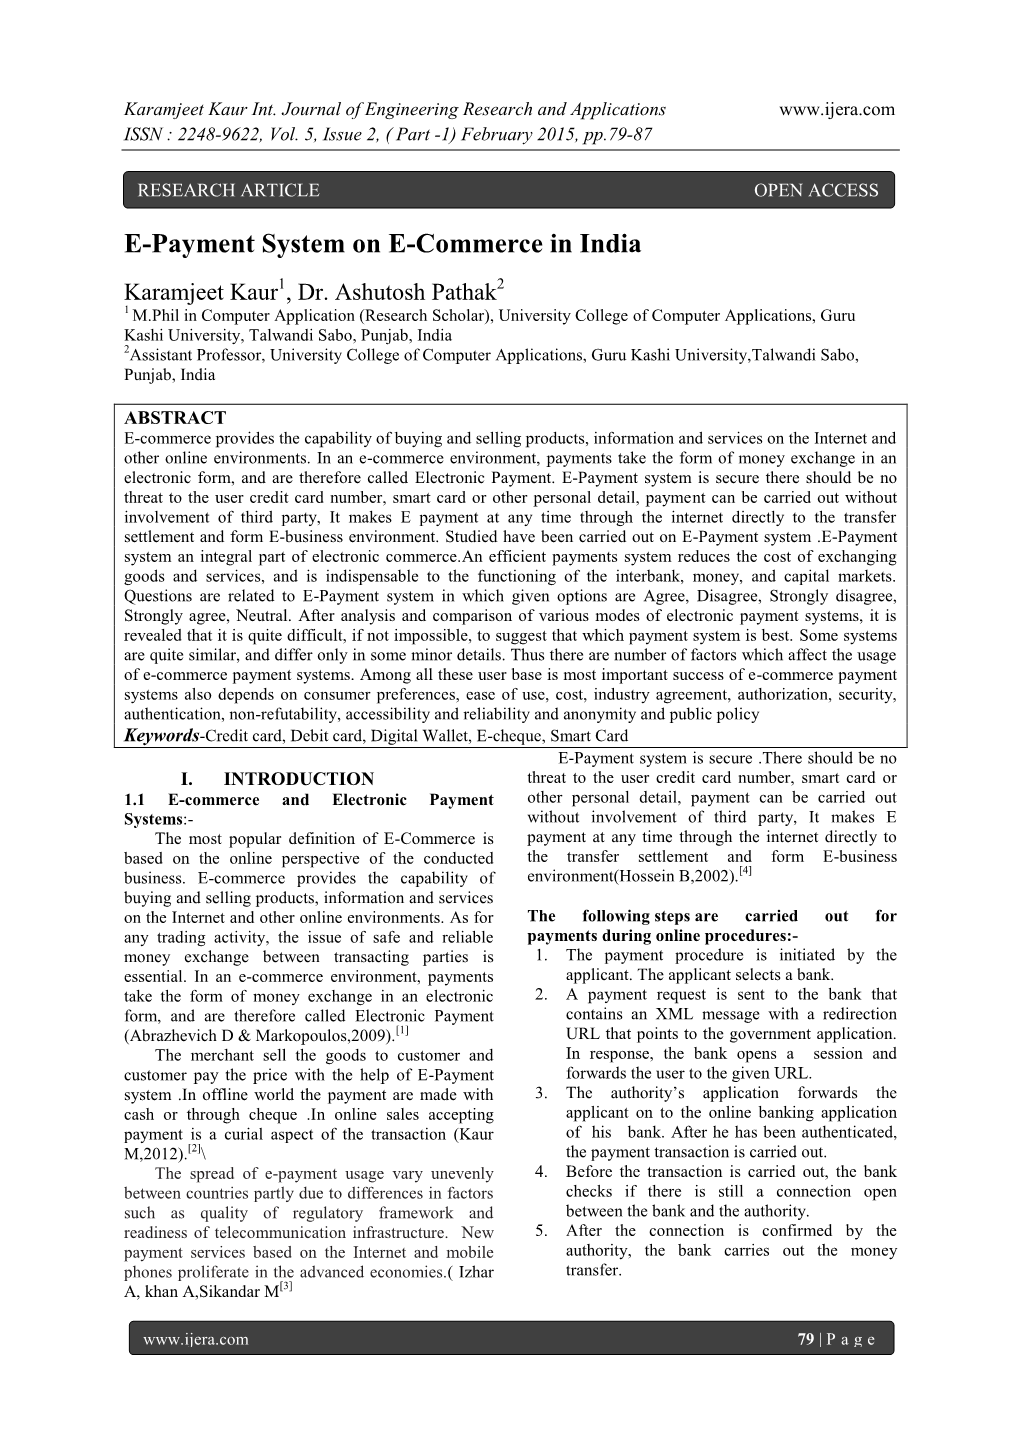 E-Payment System on E-Commerce in India